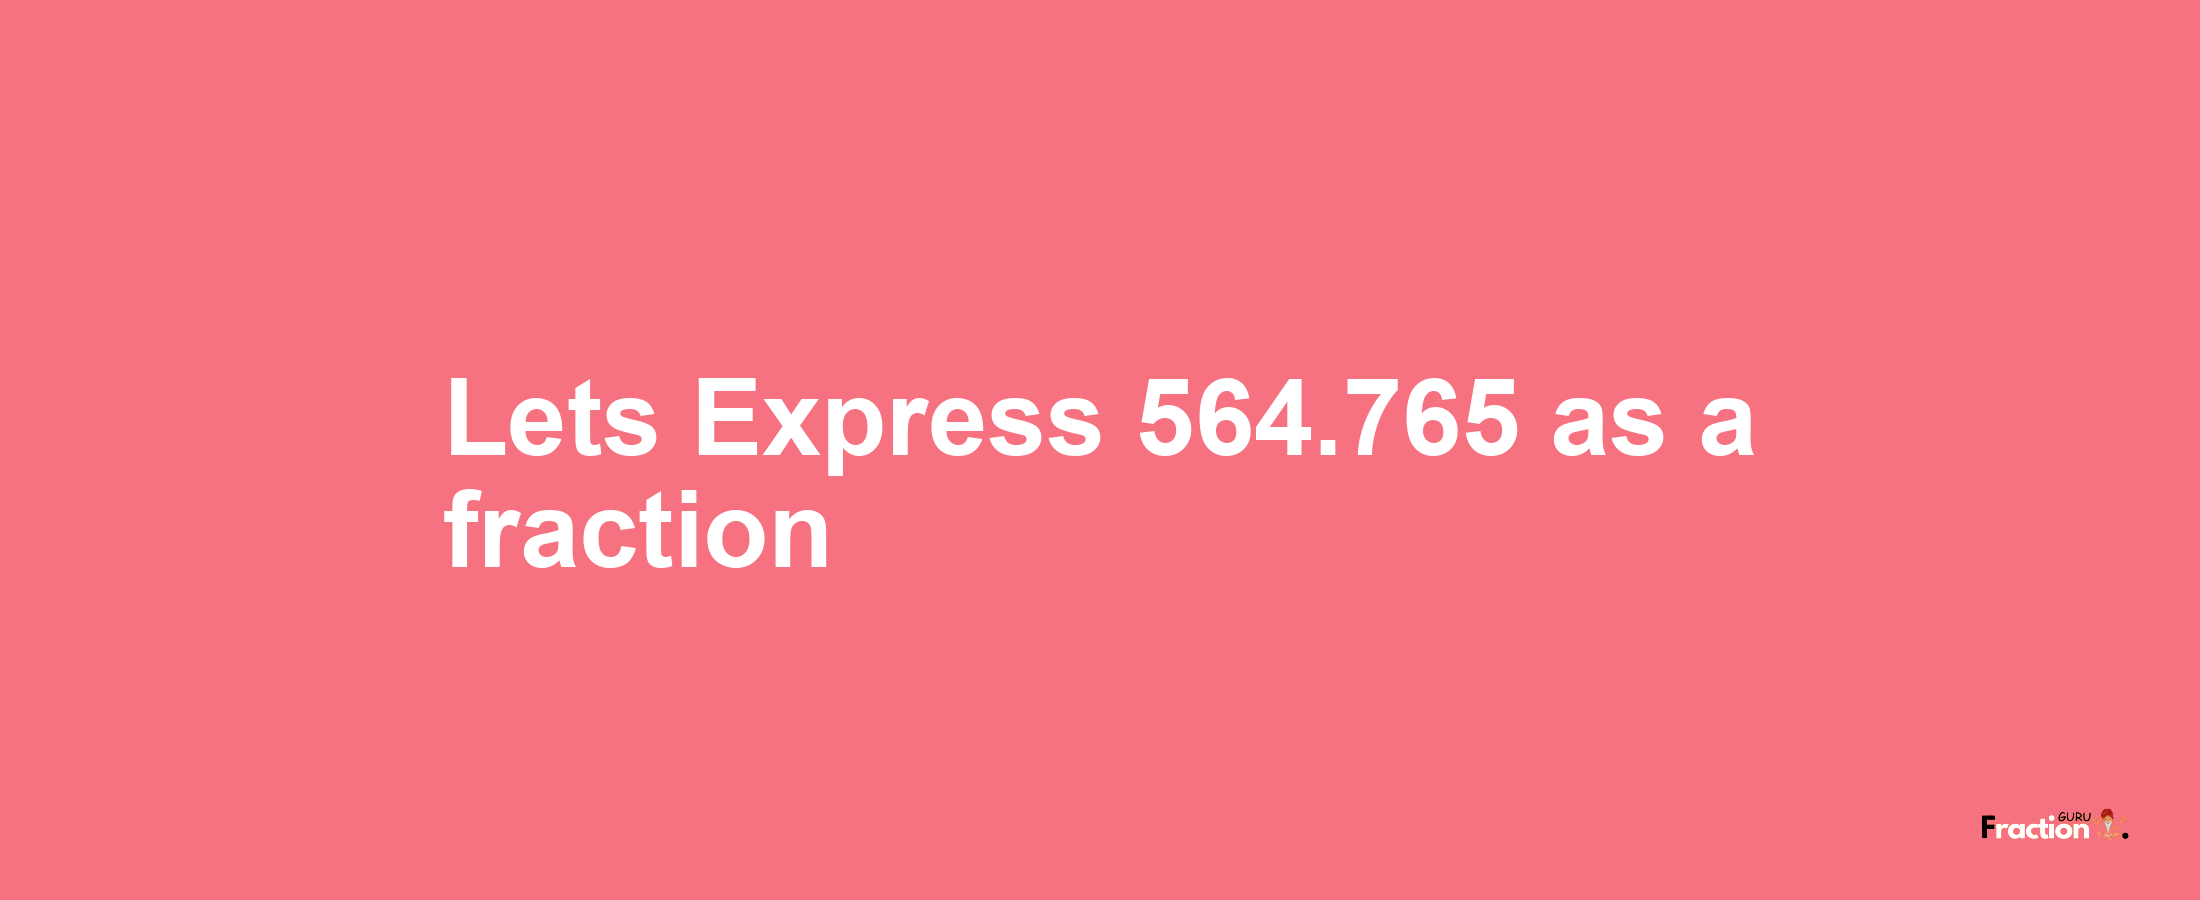 Lets Express 564.765 as afraction